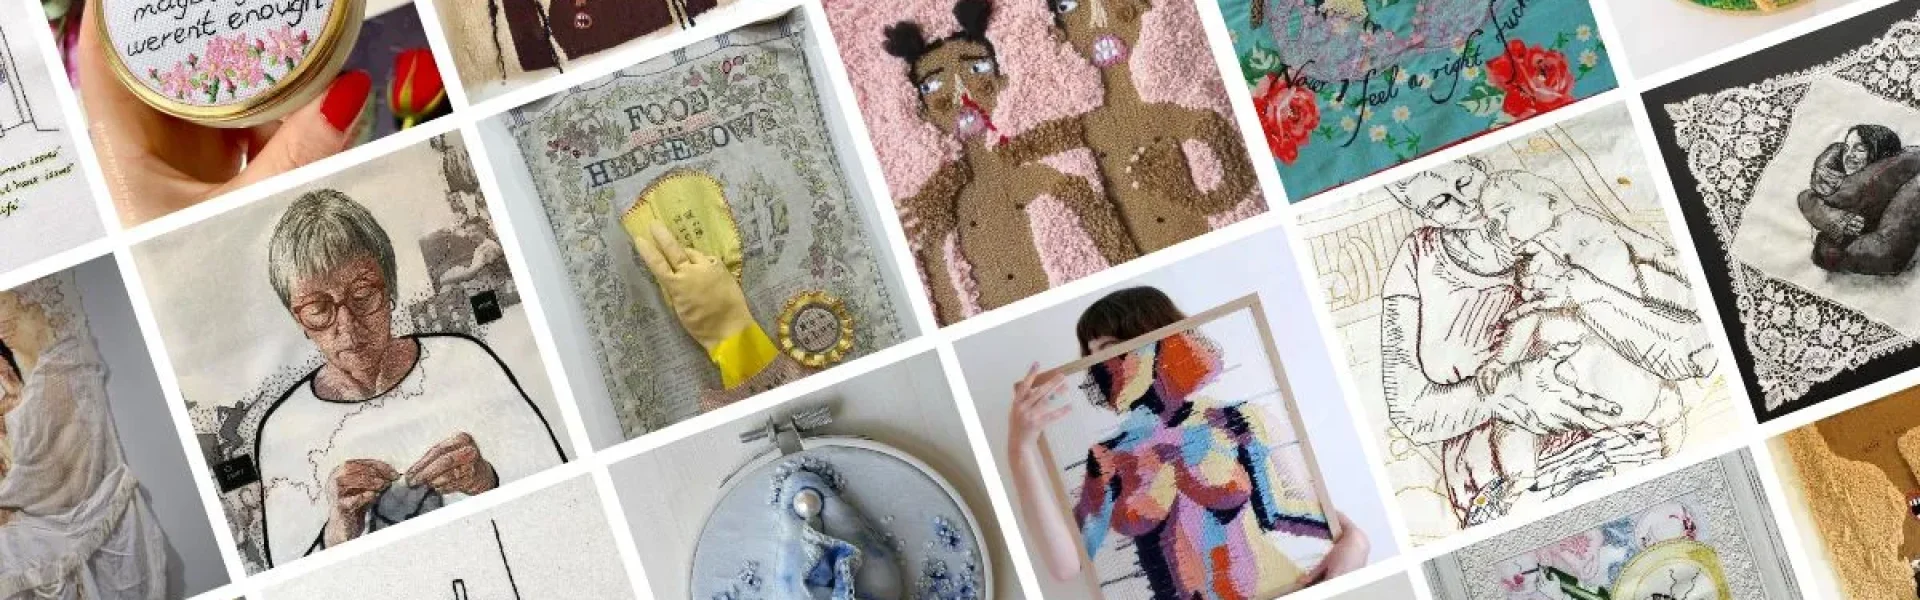 7 Textile Artists Inspired by Women